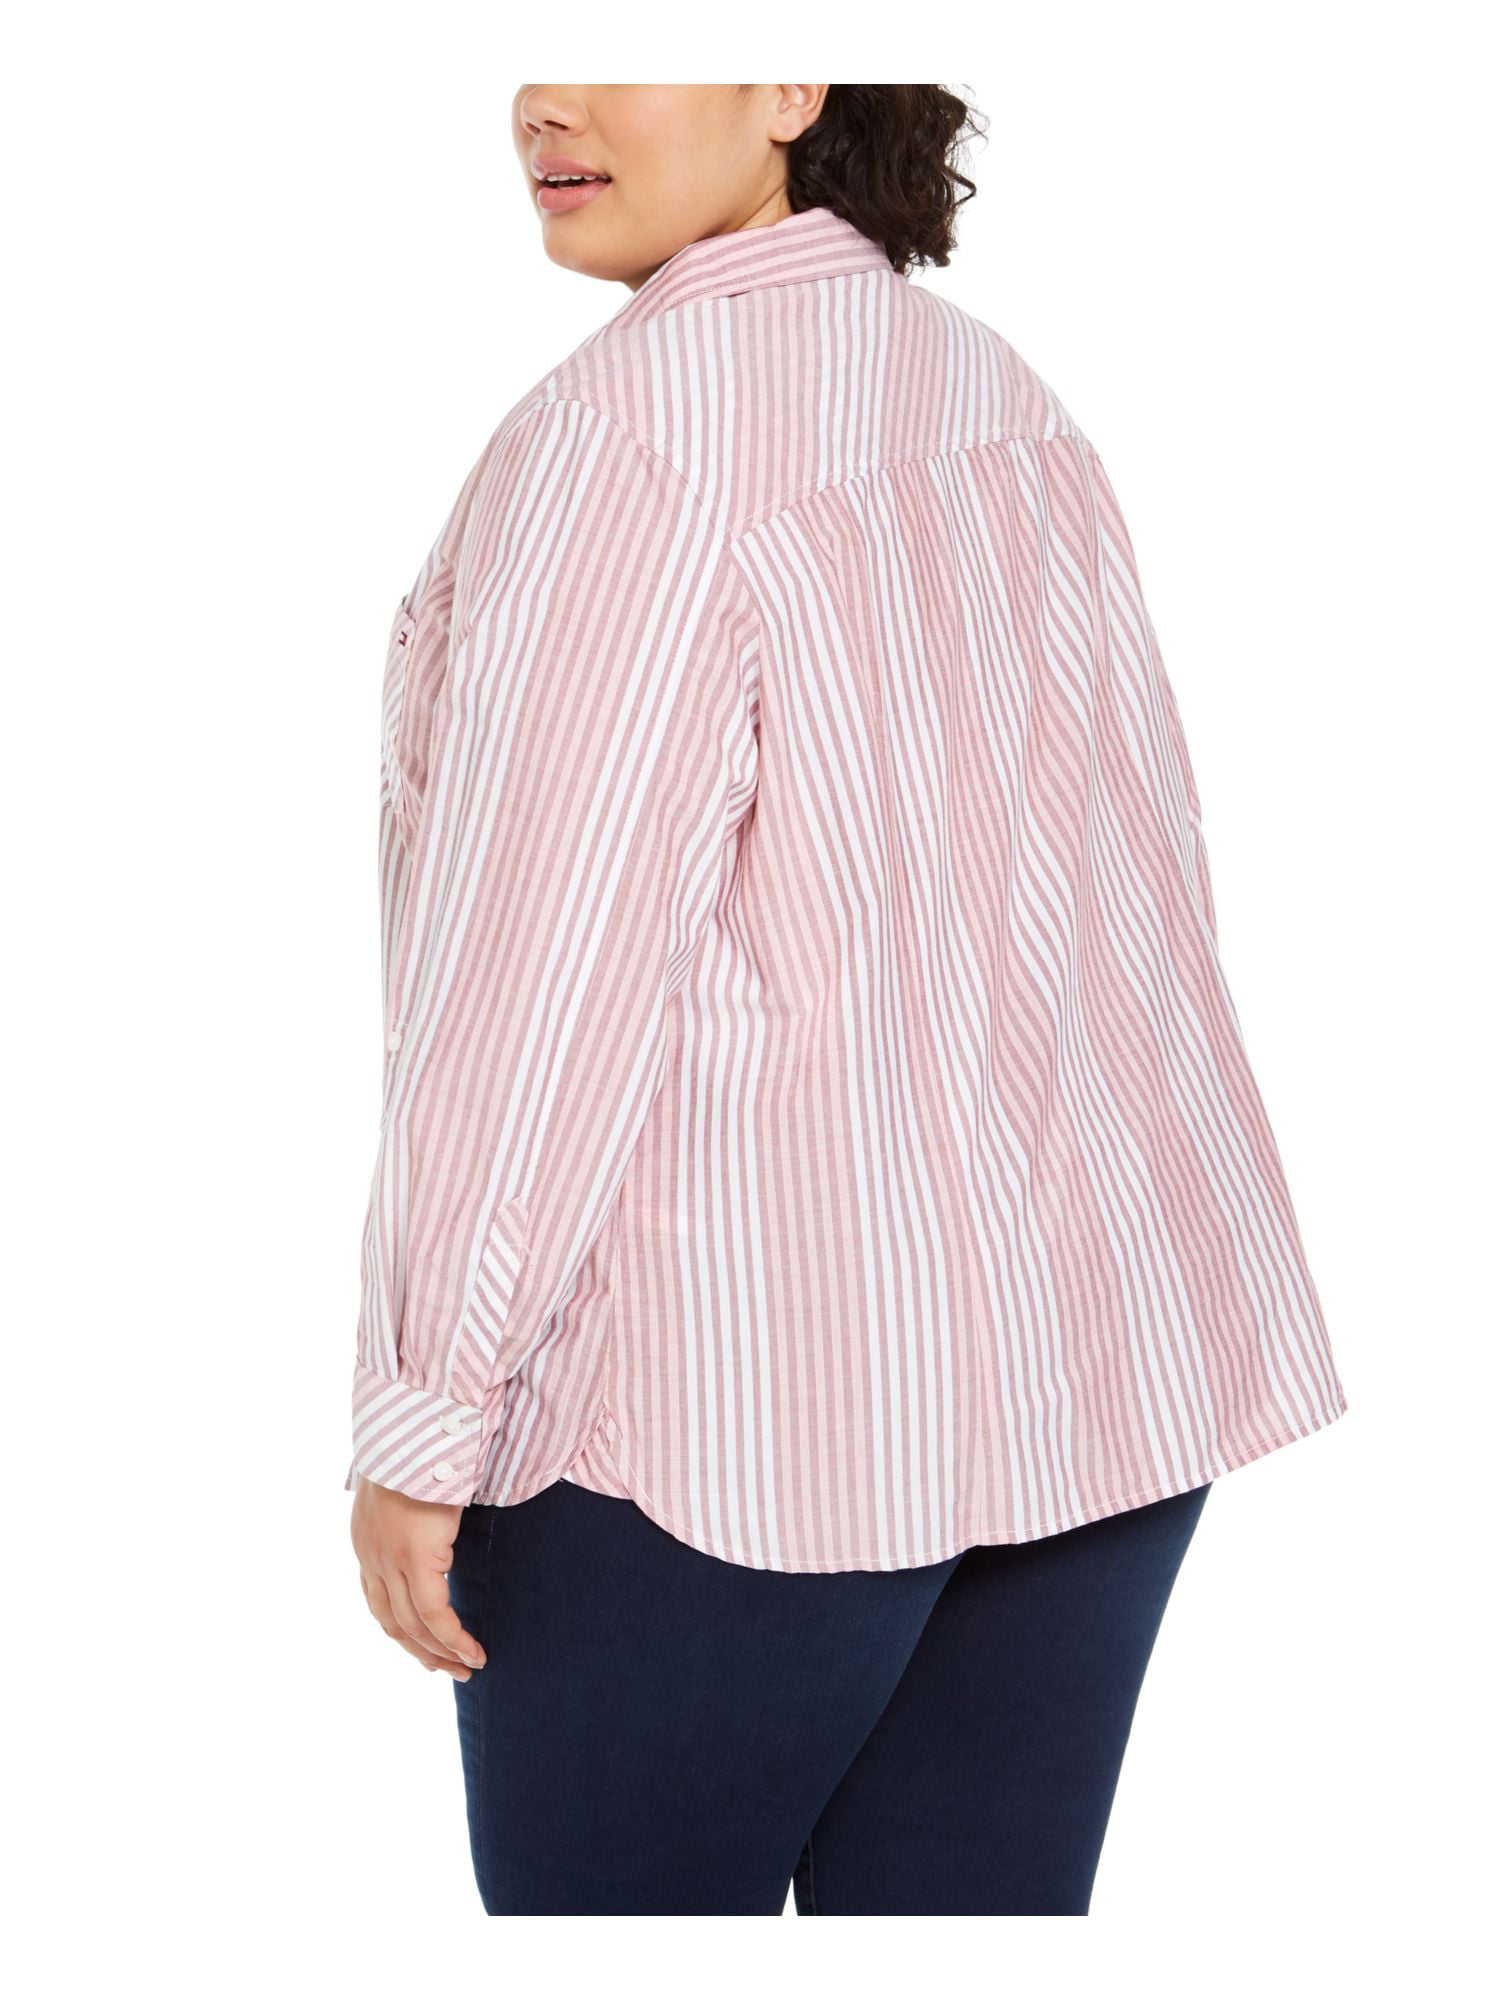 Pink Plus HILFIGER Button Top Sleeve 0X Womens TOMMY Collared Up Striped 3/4